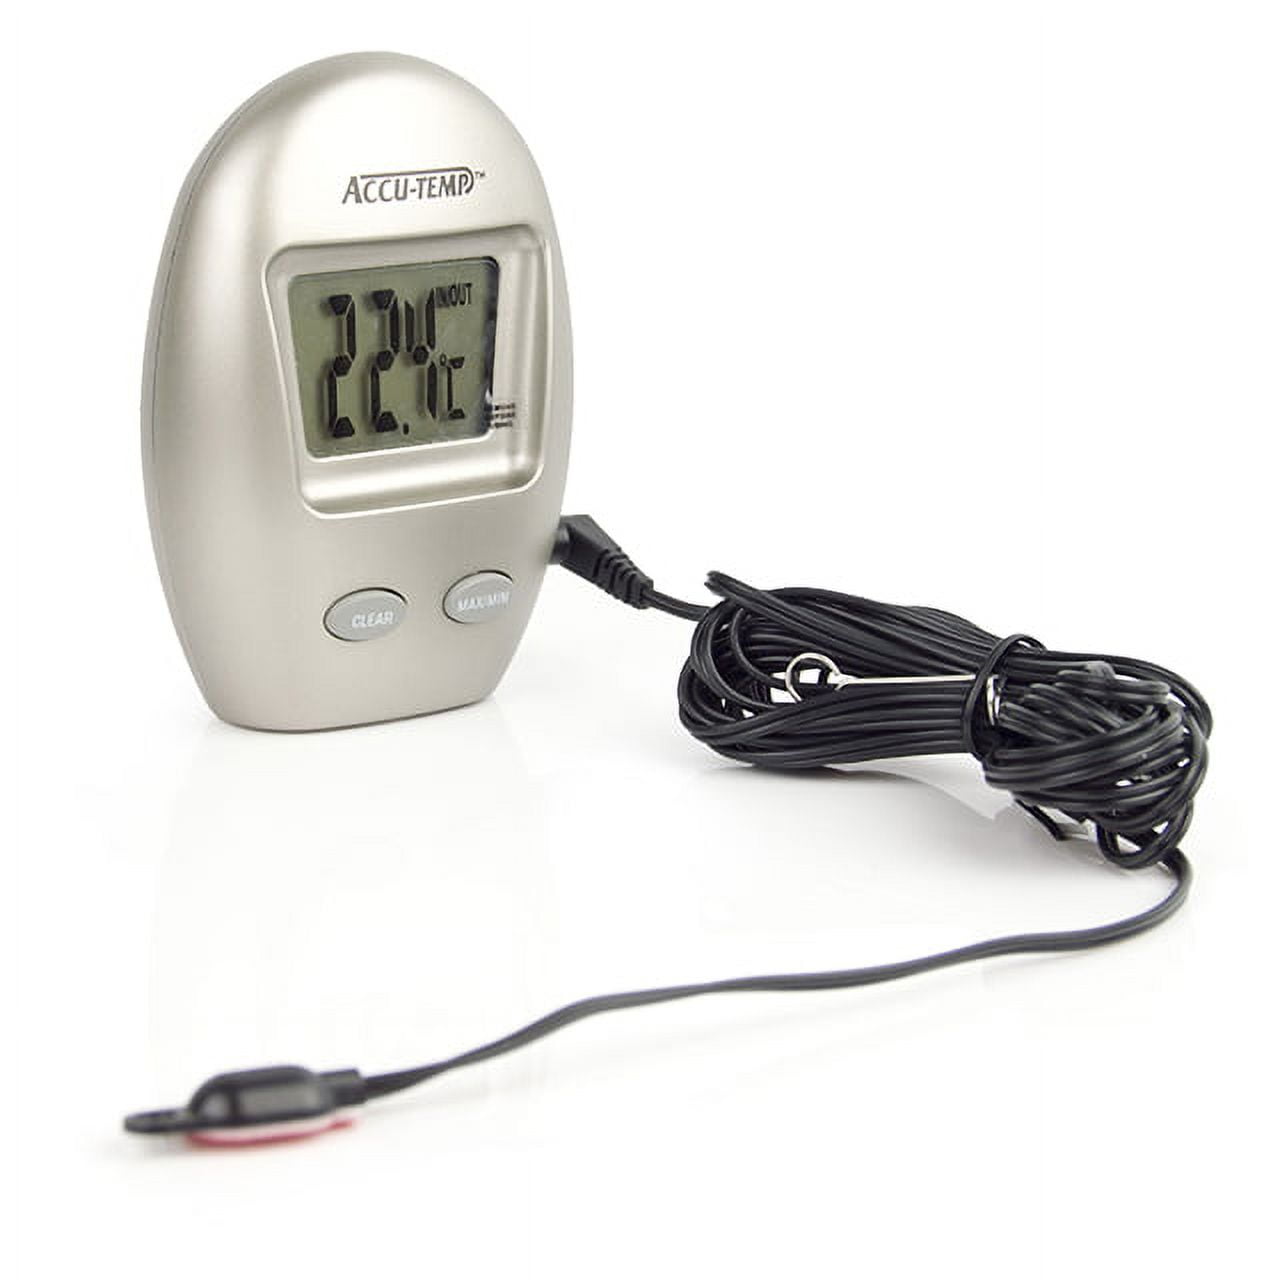 Acurite 1.6 W x 4.8 H Sensor Wireless Indoor & Outdoor Thermometer -  Tiger Island Hardware